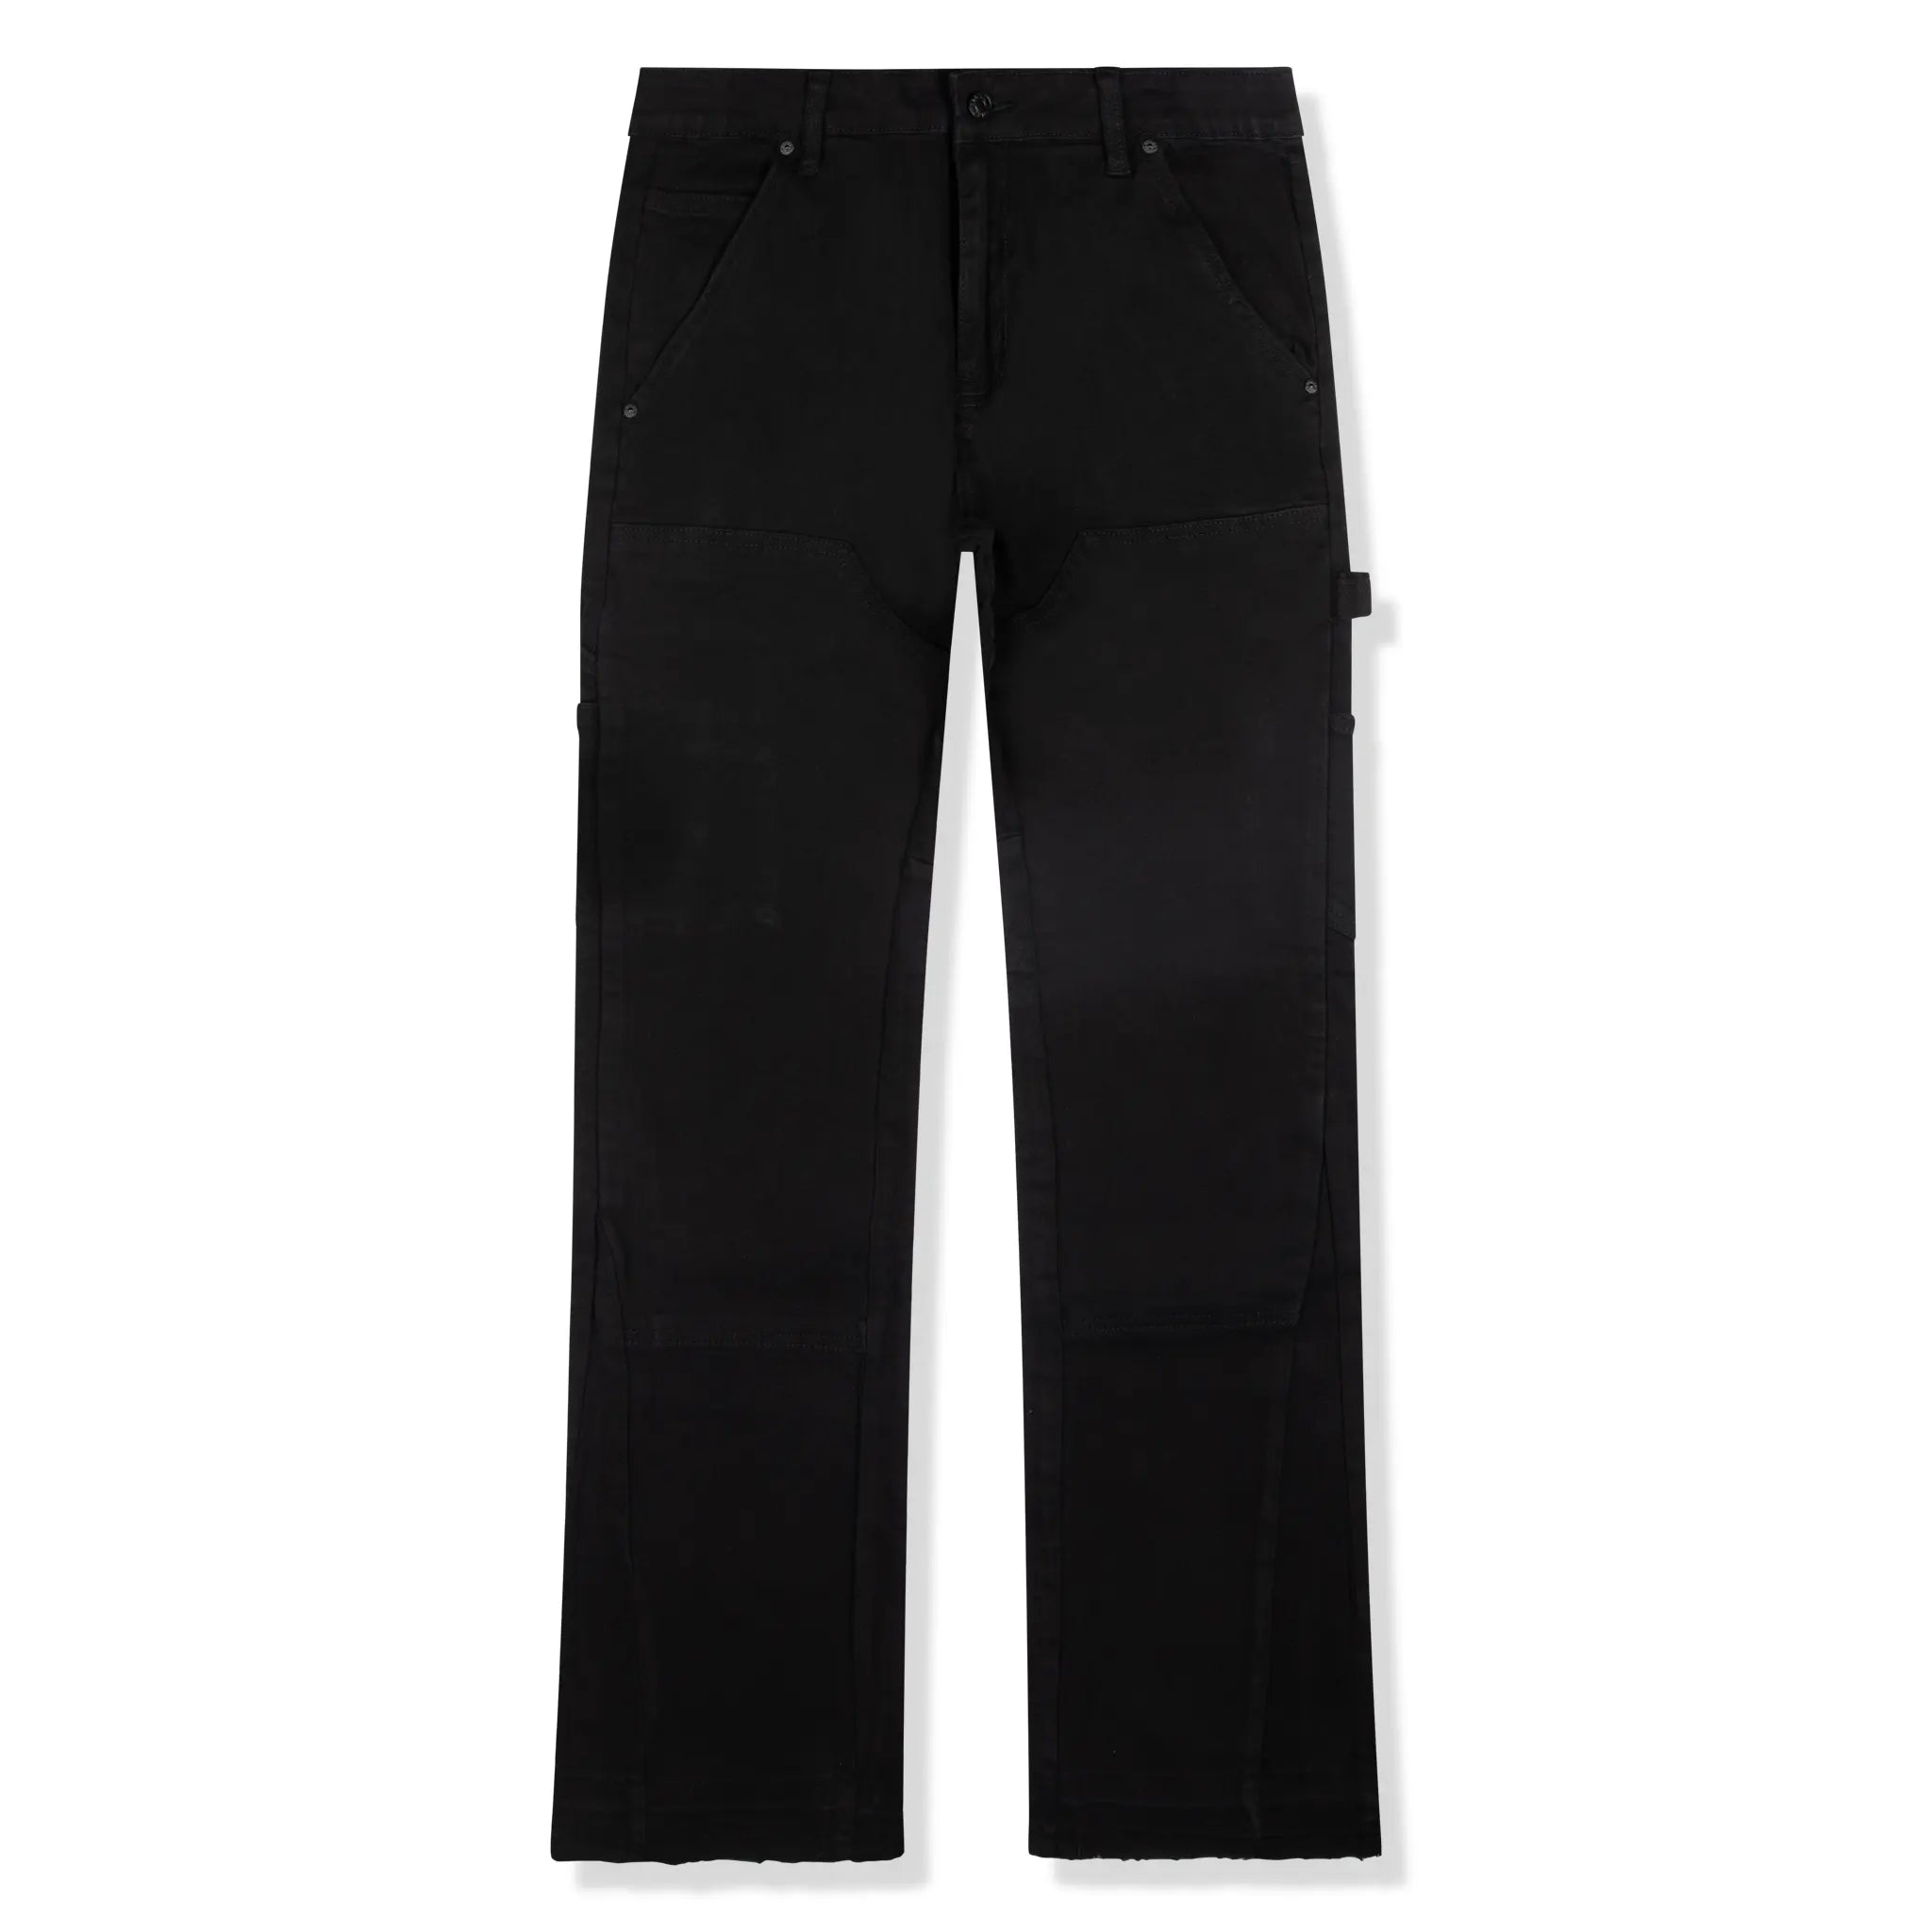 Front view of SBLUP01293 006000 Chino pants